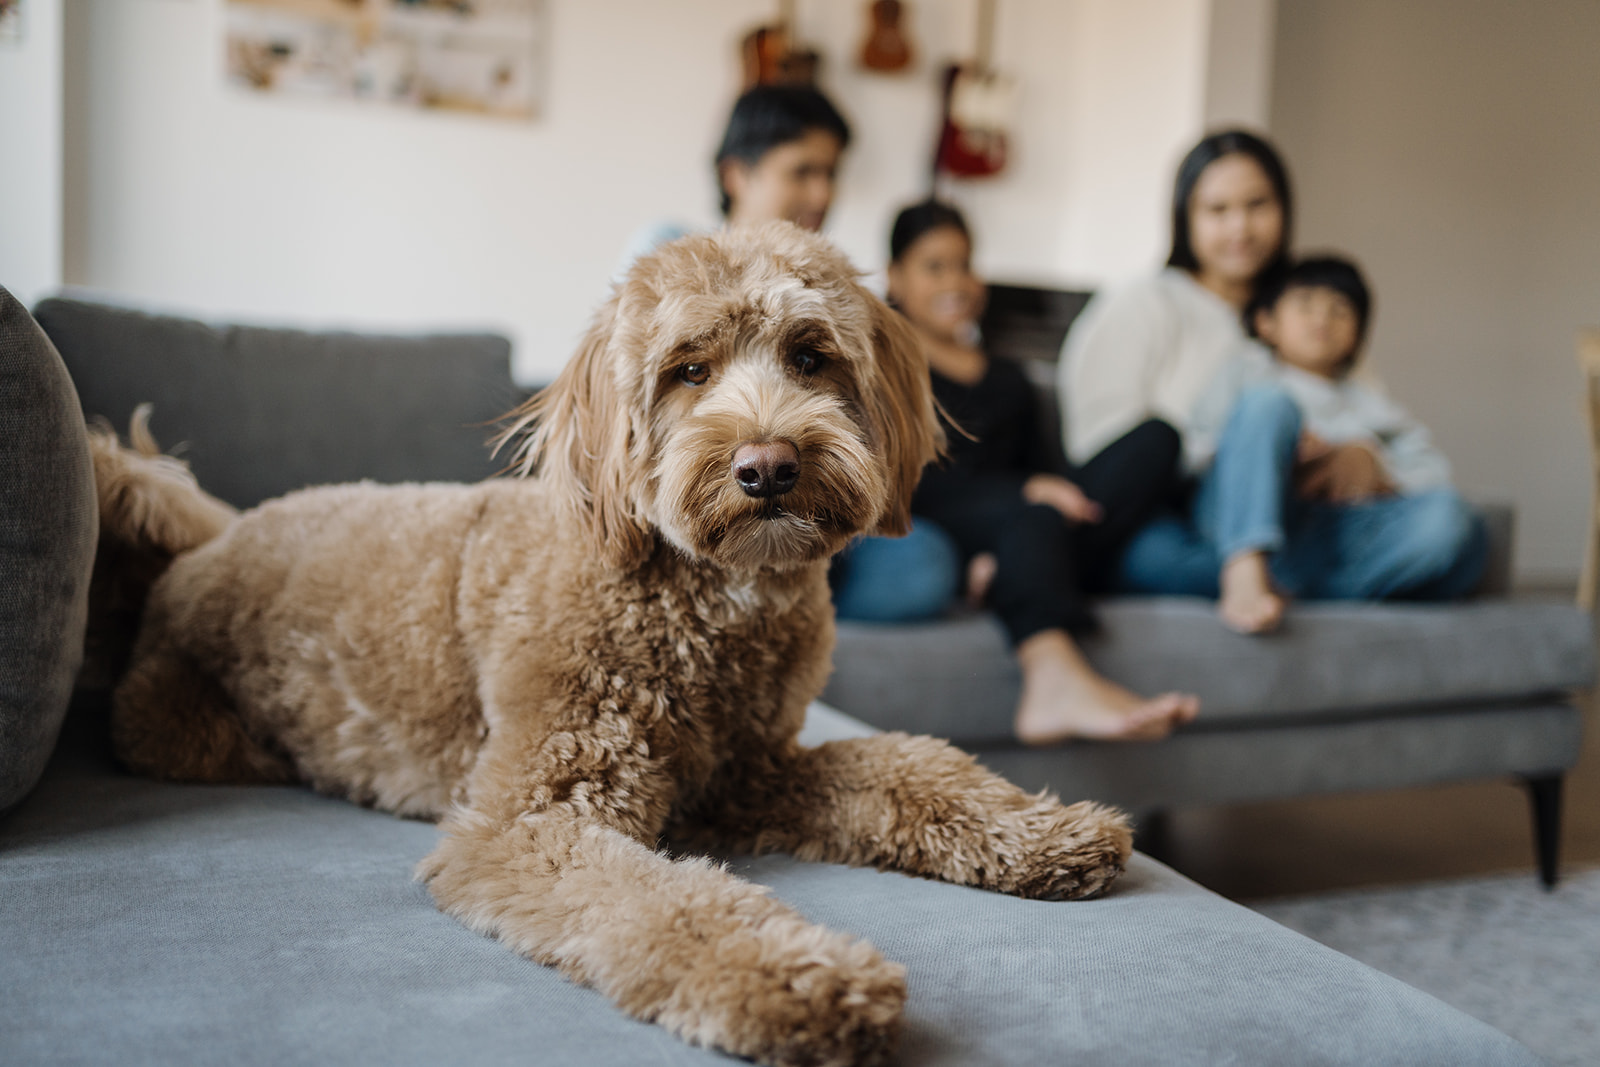 A dog sitting on the couch with the family in the background.